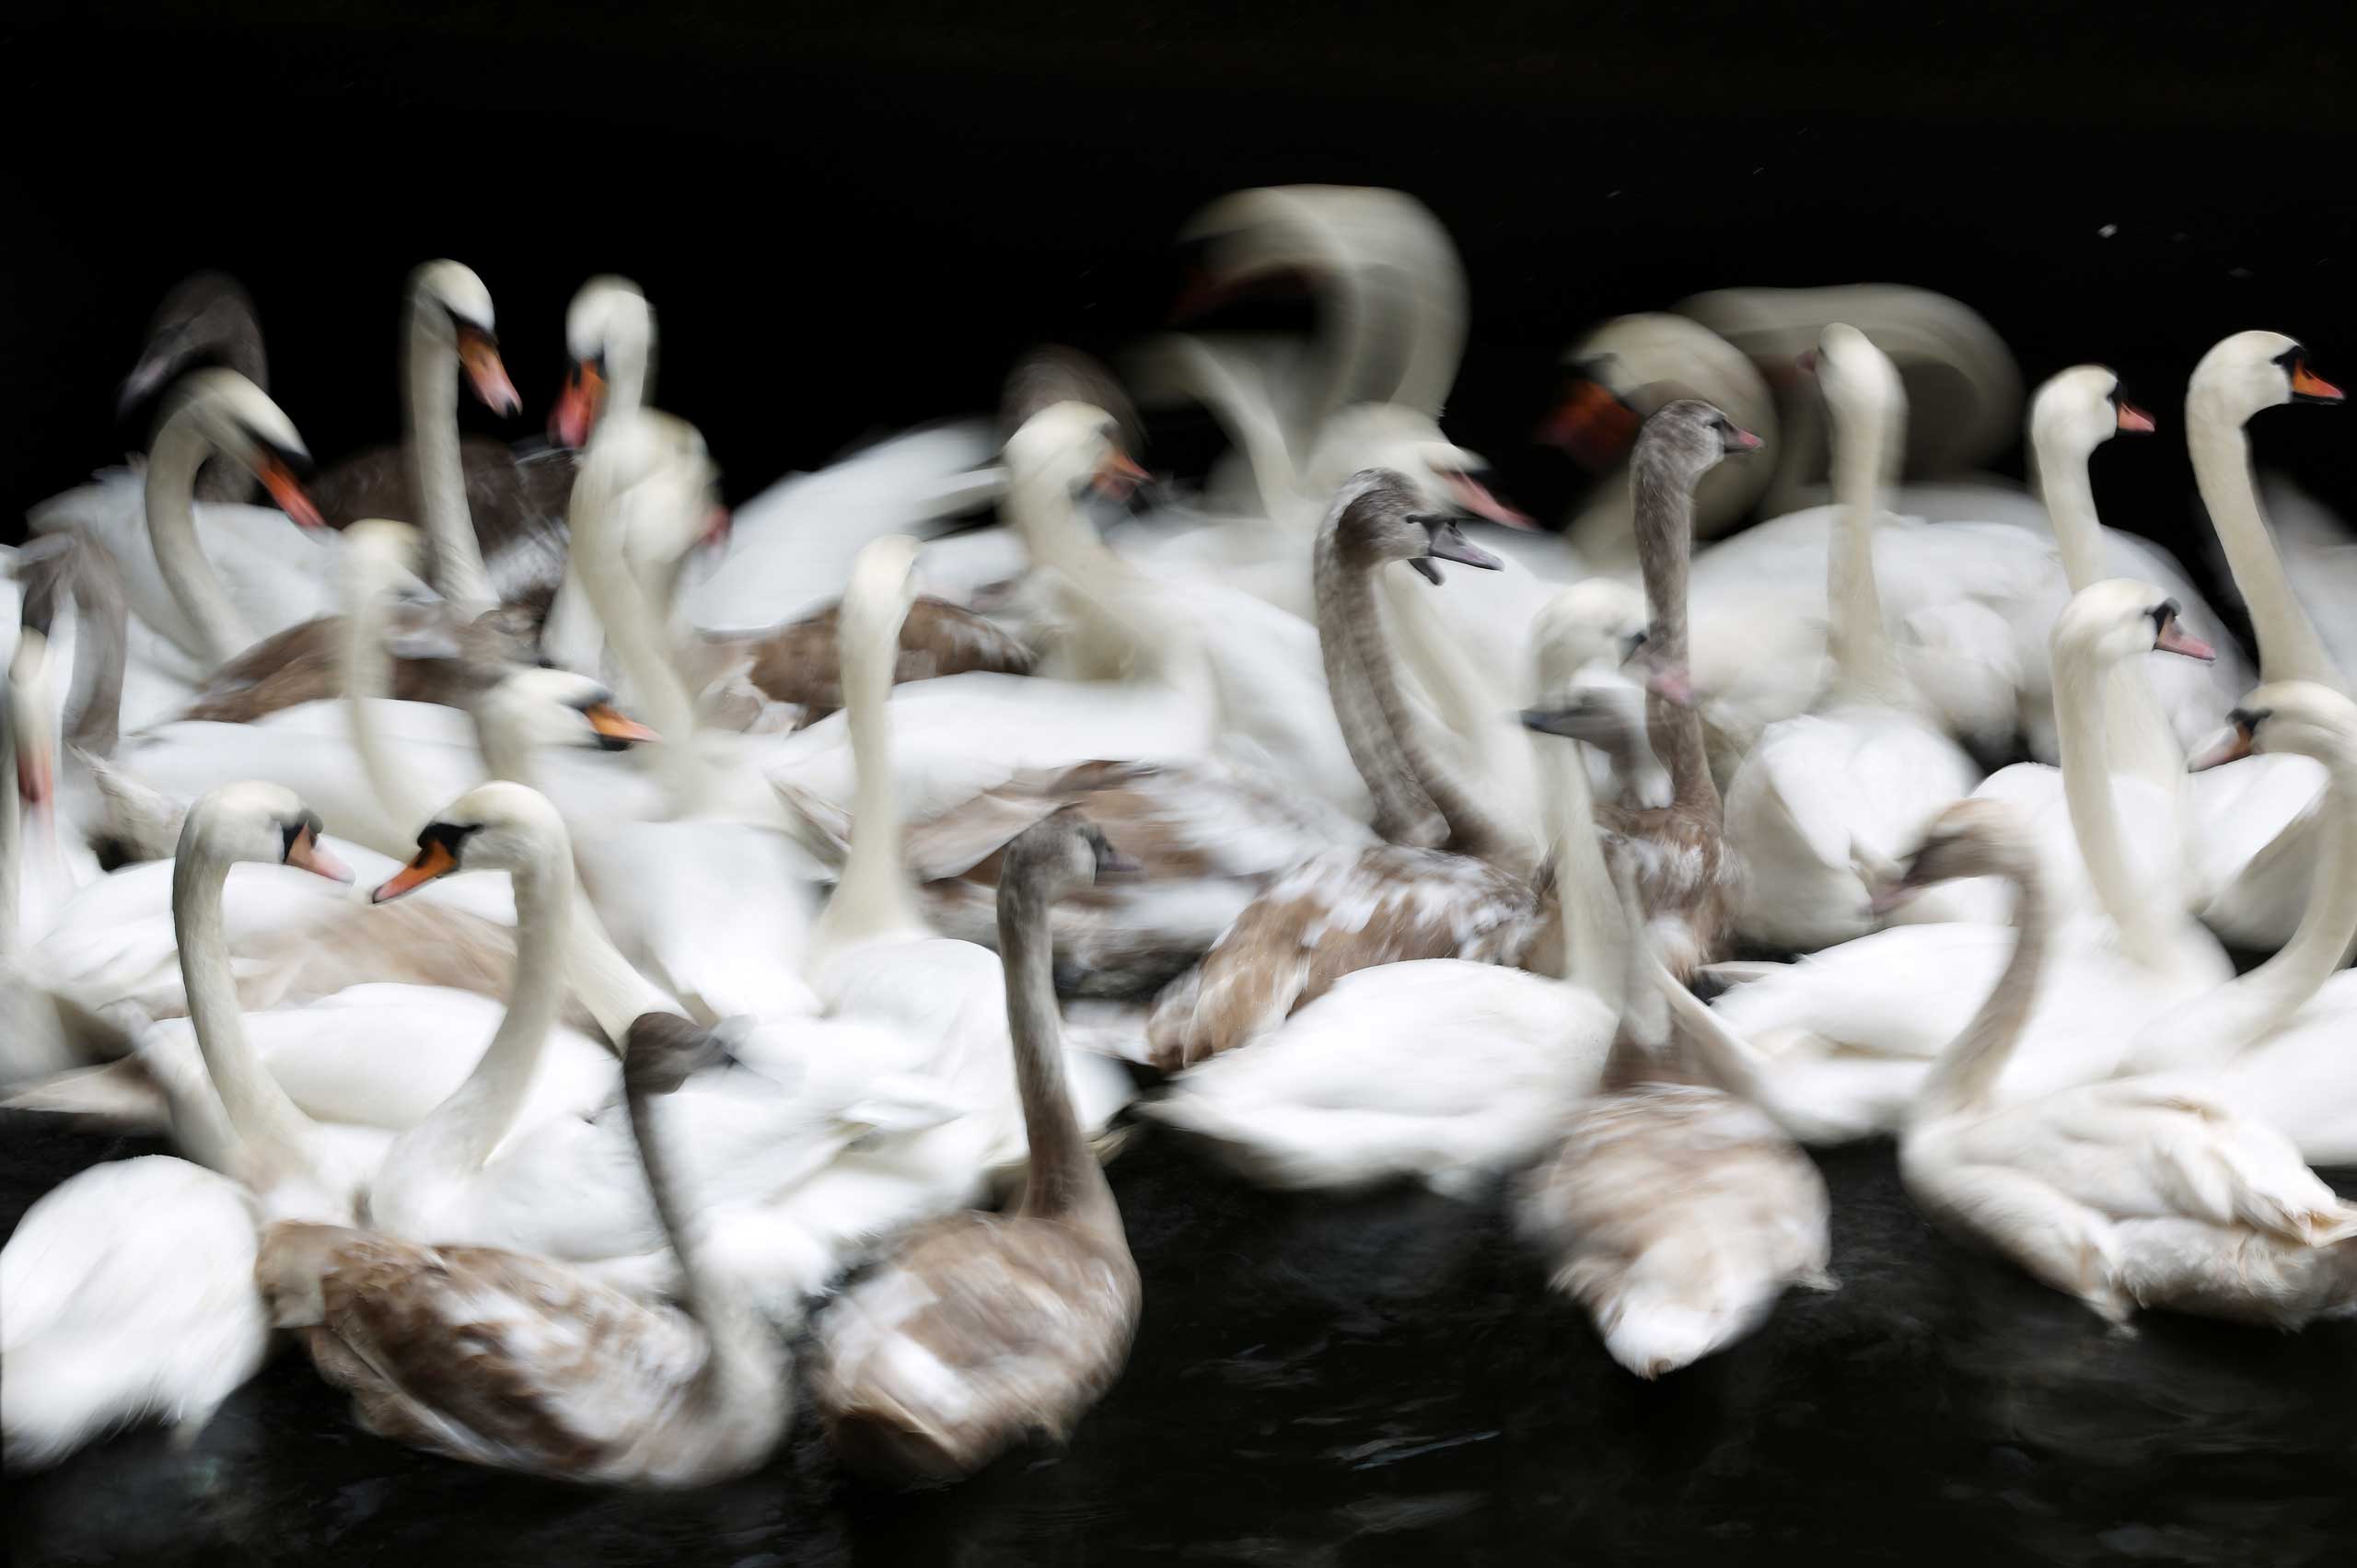 Swans are gathered at city hall lock on the Alster Lake at City Hall in Hamburg, Germany, November 18, 2014. The Alster swans will spend the winter in the Eppendorf Muehlenteich pond.